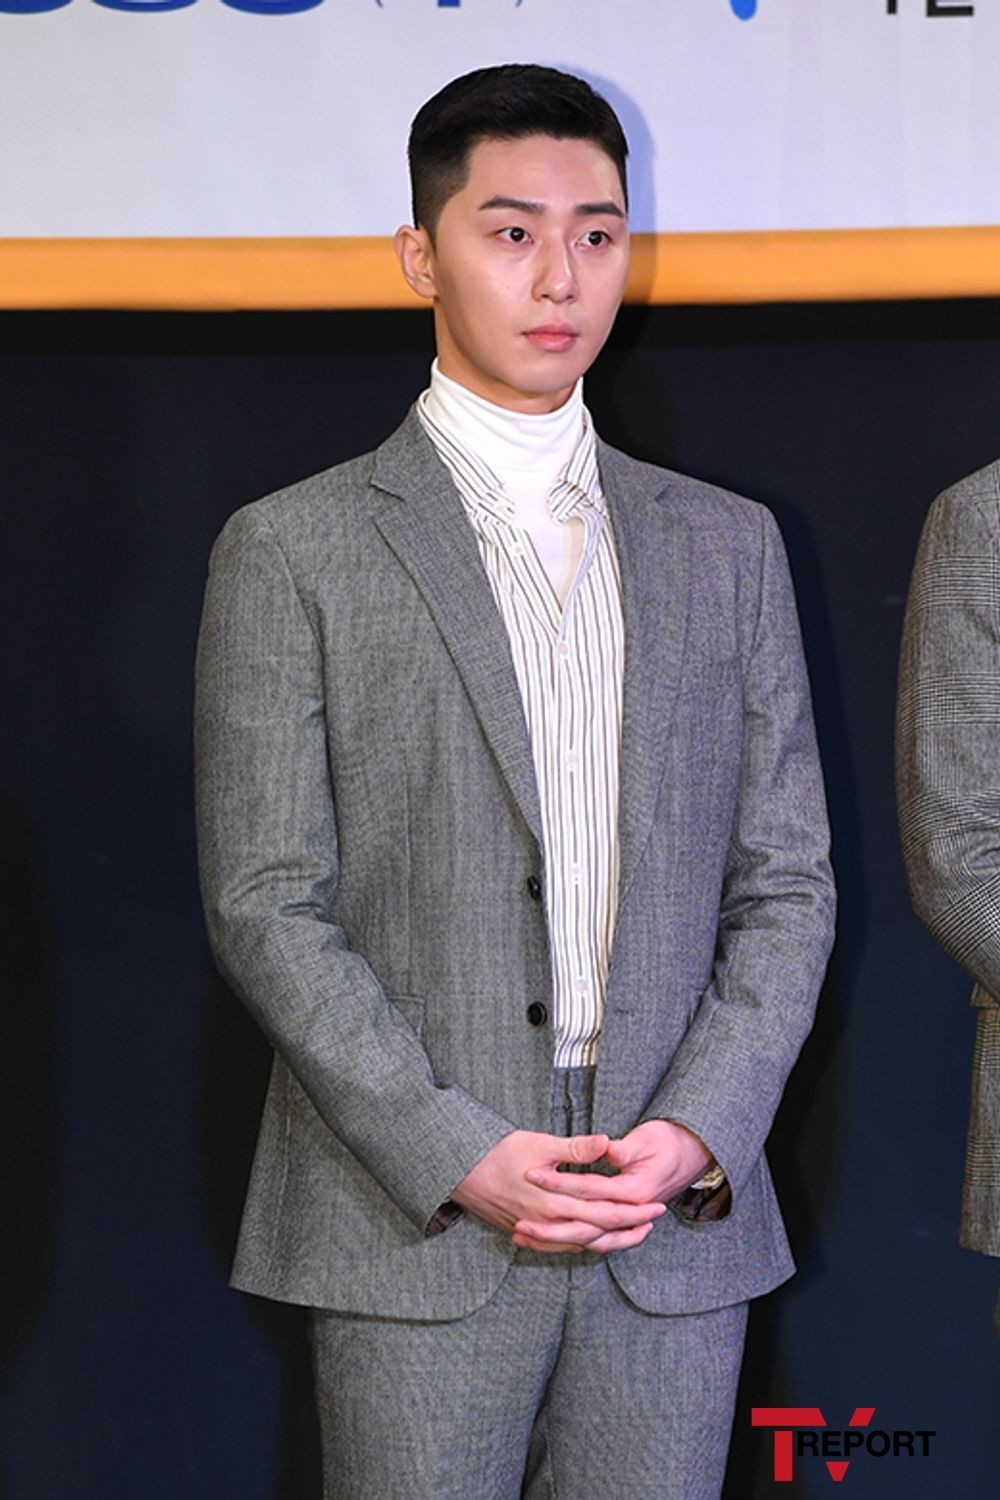 Actor Park Seo-joon suffered hacking damage to his personal YouTube channel Record PARKsAs a result, Awesome E & T will request a formal Susa to Cyber ​​Susa University, and the Record Box channel will be discontinued for the time being.On the 10th, Awesome E & T said, On the morning of the 9th, we detected activities that seemed to have been hacked, such as blocking access to managers and deleting posts on our personal YouTube channel of Park Seo-joon.I immediately requested recovery and action for hacking damage to YouTube headquarters. Jo Sung-ha will formally request Susa to Cyber Susa for illegal activities, and I will inform you of the suspension of the Record PARK channel until the accurate understanding of the damage is made, he said. I will do my best for the quick recovery.Park Seo-joon posted the notice on his instagram on the day, saying, I feel like I have been deleted from my memories. I hope there is no secondary damage.Park Seo-joon opened its YouTube channel in July, which was so popular that it exceeded 100,000 subscribers in just one day.Meanwhile, Park Seo-joon is currently filming JTBC drama Itae One Clath.Hi, this is Awesome.On the morning of the 9th, it was detected that activities that appeared to have been hacked, such as blocking access to managers and deleting posts on our personal YouTube channel of our company, Park Seo-joon.We immediately requested the YouTube headquarters to recover and take action against hacking damage.In addition, Jo Sung-ha will formally request Susa to Cyber ​​Susa University for illegal activities, and will inform the company of the suspension of the Record PARK channel until accurate identification of the damage is made.I am sorry to have troubled you fans and channel subscribers who love Park Seo-joon, and I will do my best for quick recovery.